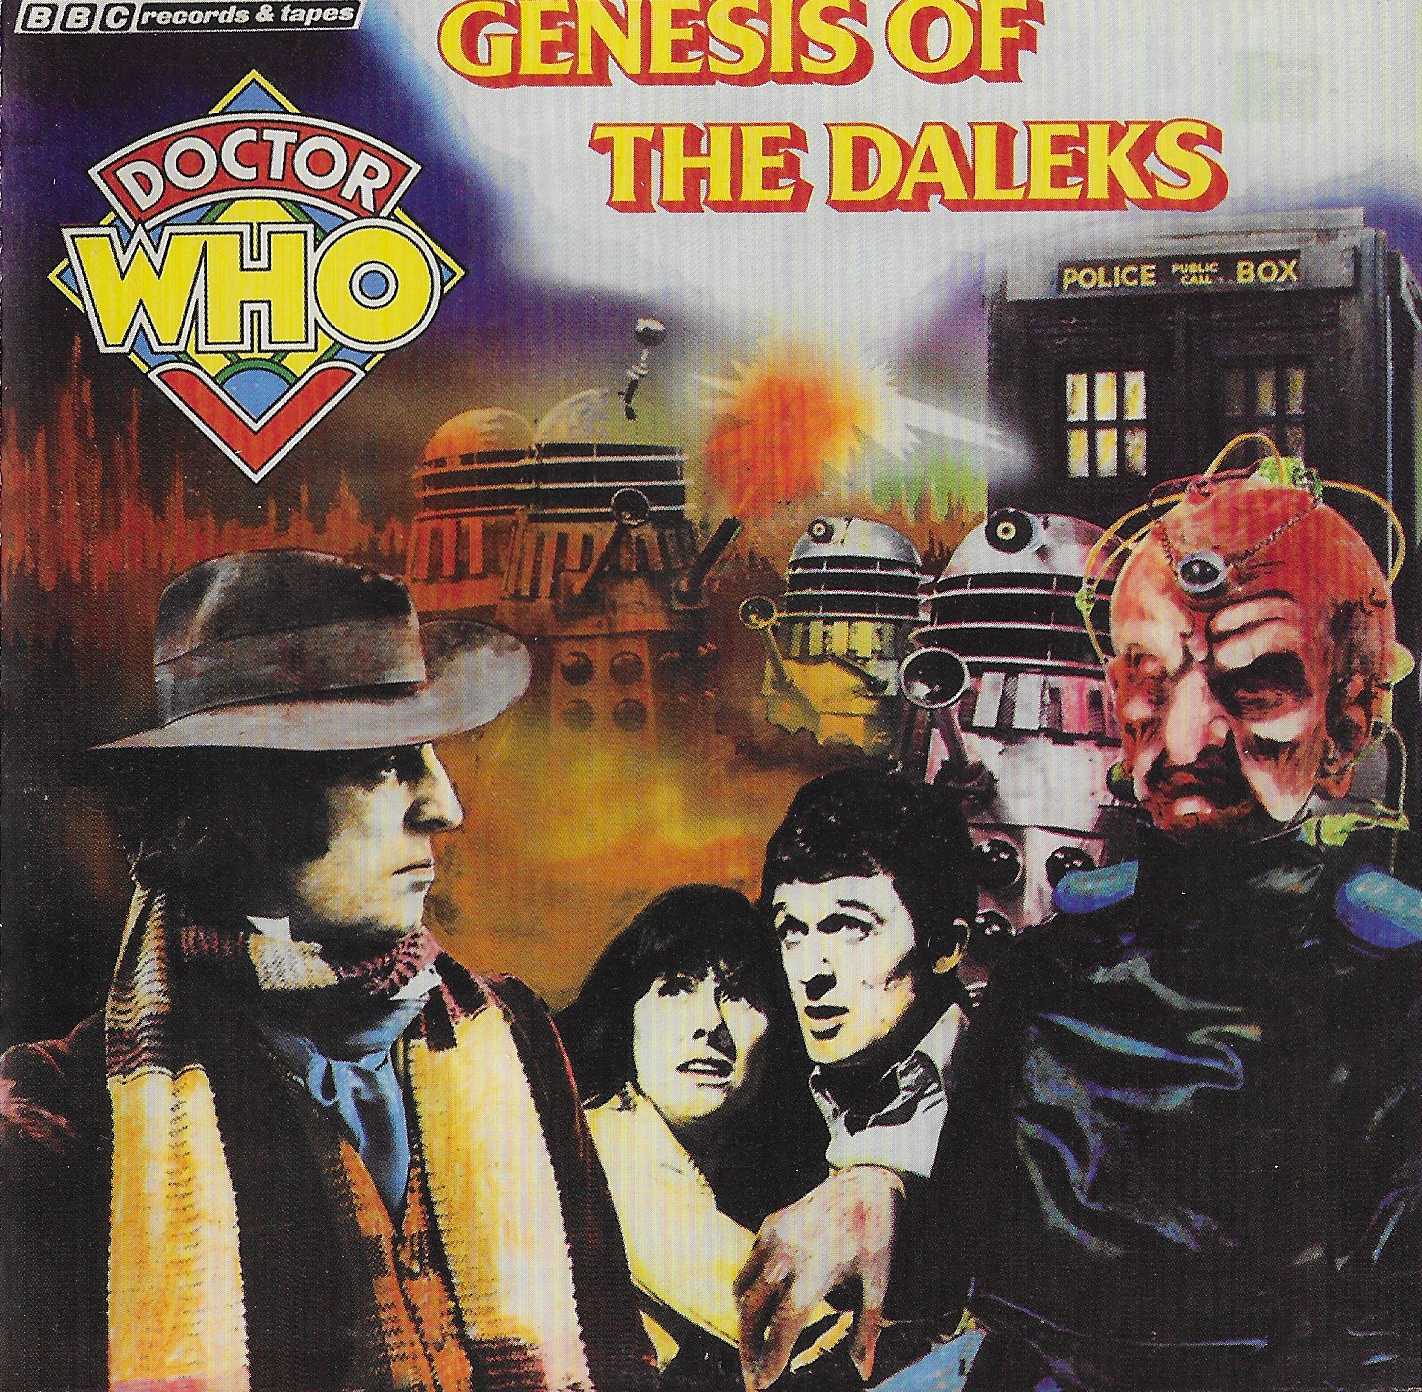 Picture of ISBN 978-1-4084-6817-3 Doctor Who - Genesis of the Daleks by artist Terry Nation from the BBC cds - Records and Tapes library